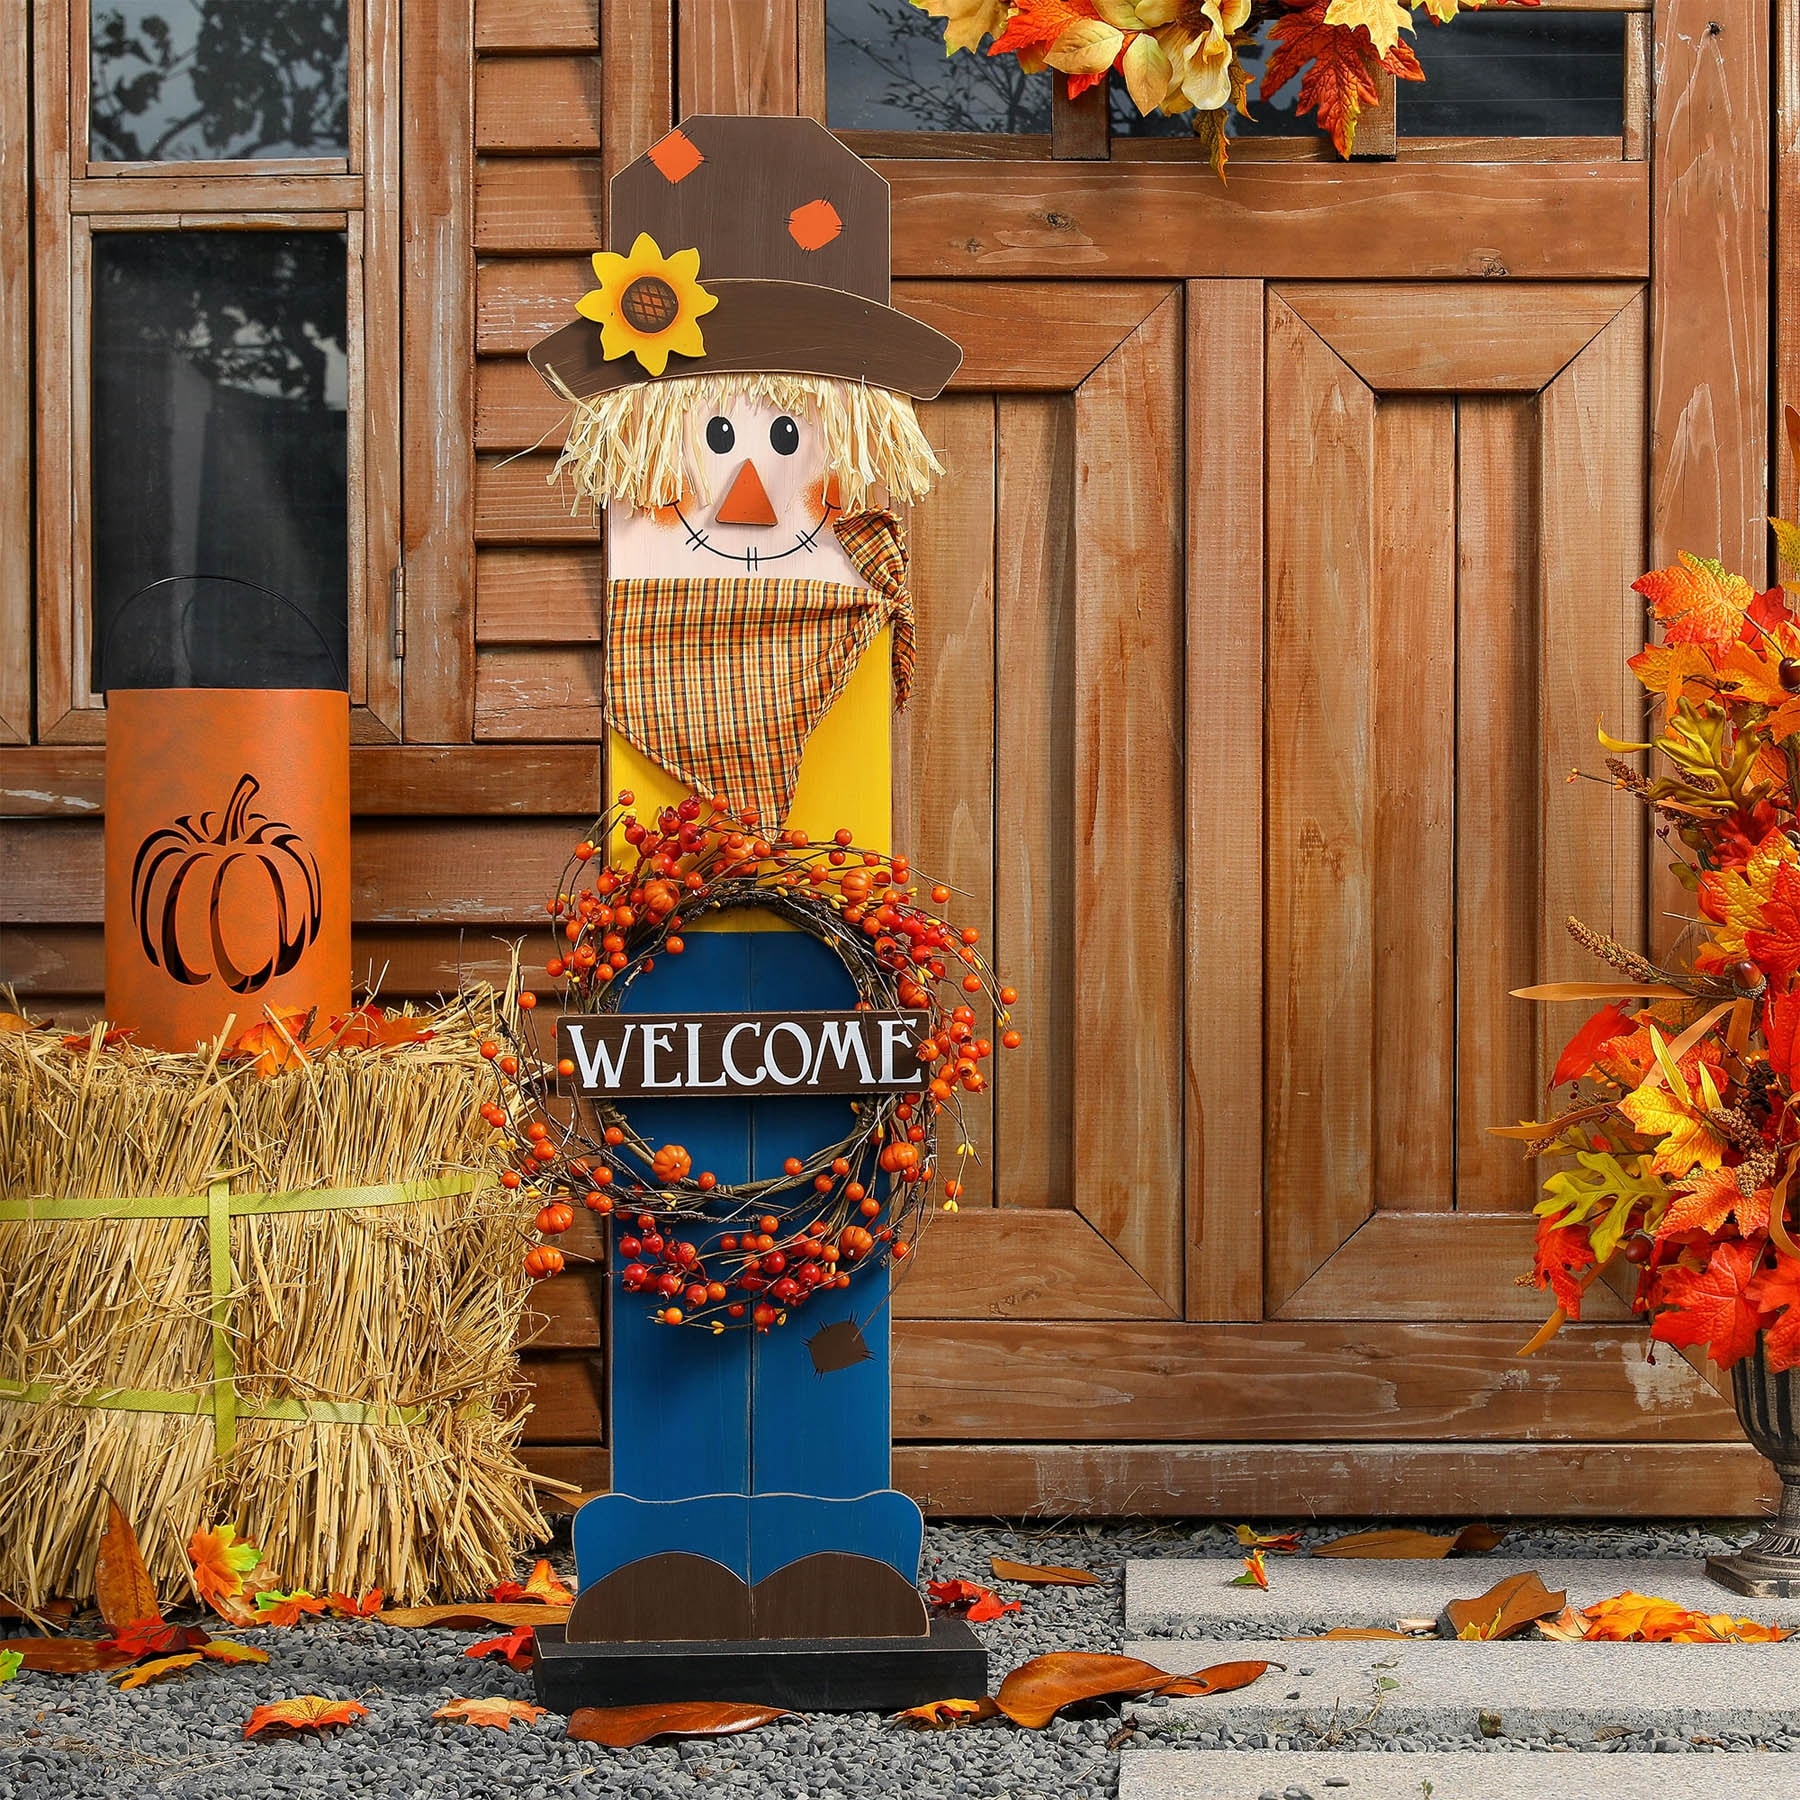 https://ak1.ostkcdn.com/images/products/is/images/direct/f747779c5865fd8f6152126b4f728954d5105f88/Glitzhome-Fall-Lighted-Wooden-Welcome-Porch-Decor-w-Wreath.jpg